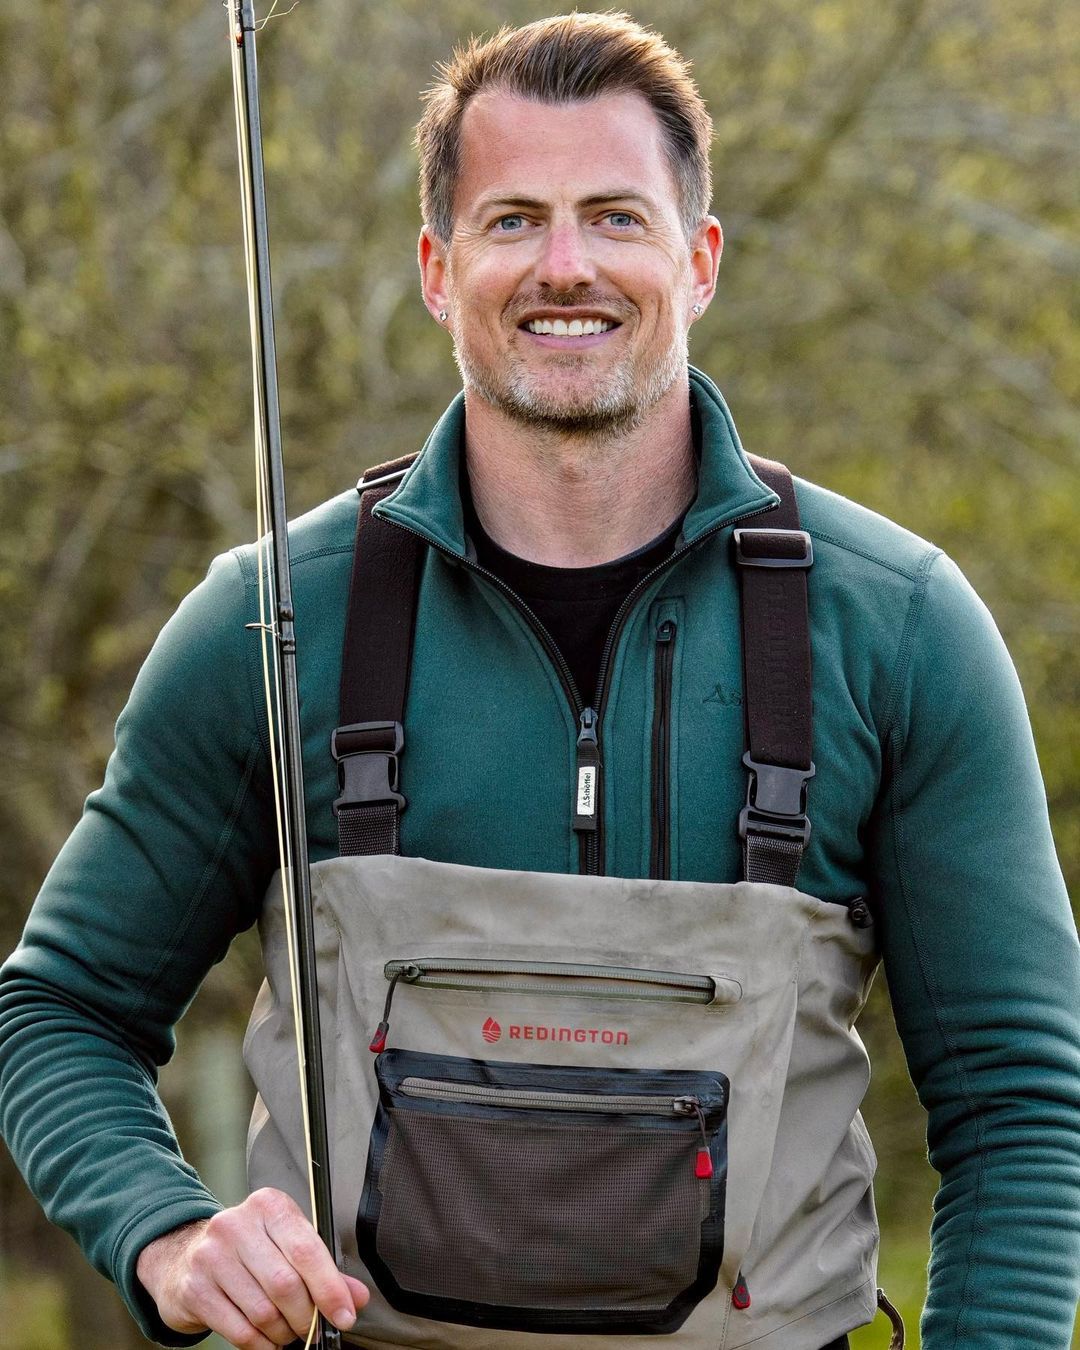 The Technical Fly Fishing Collection by Schöffel Country